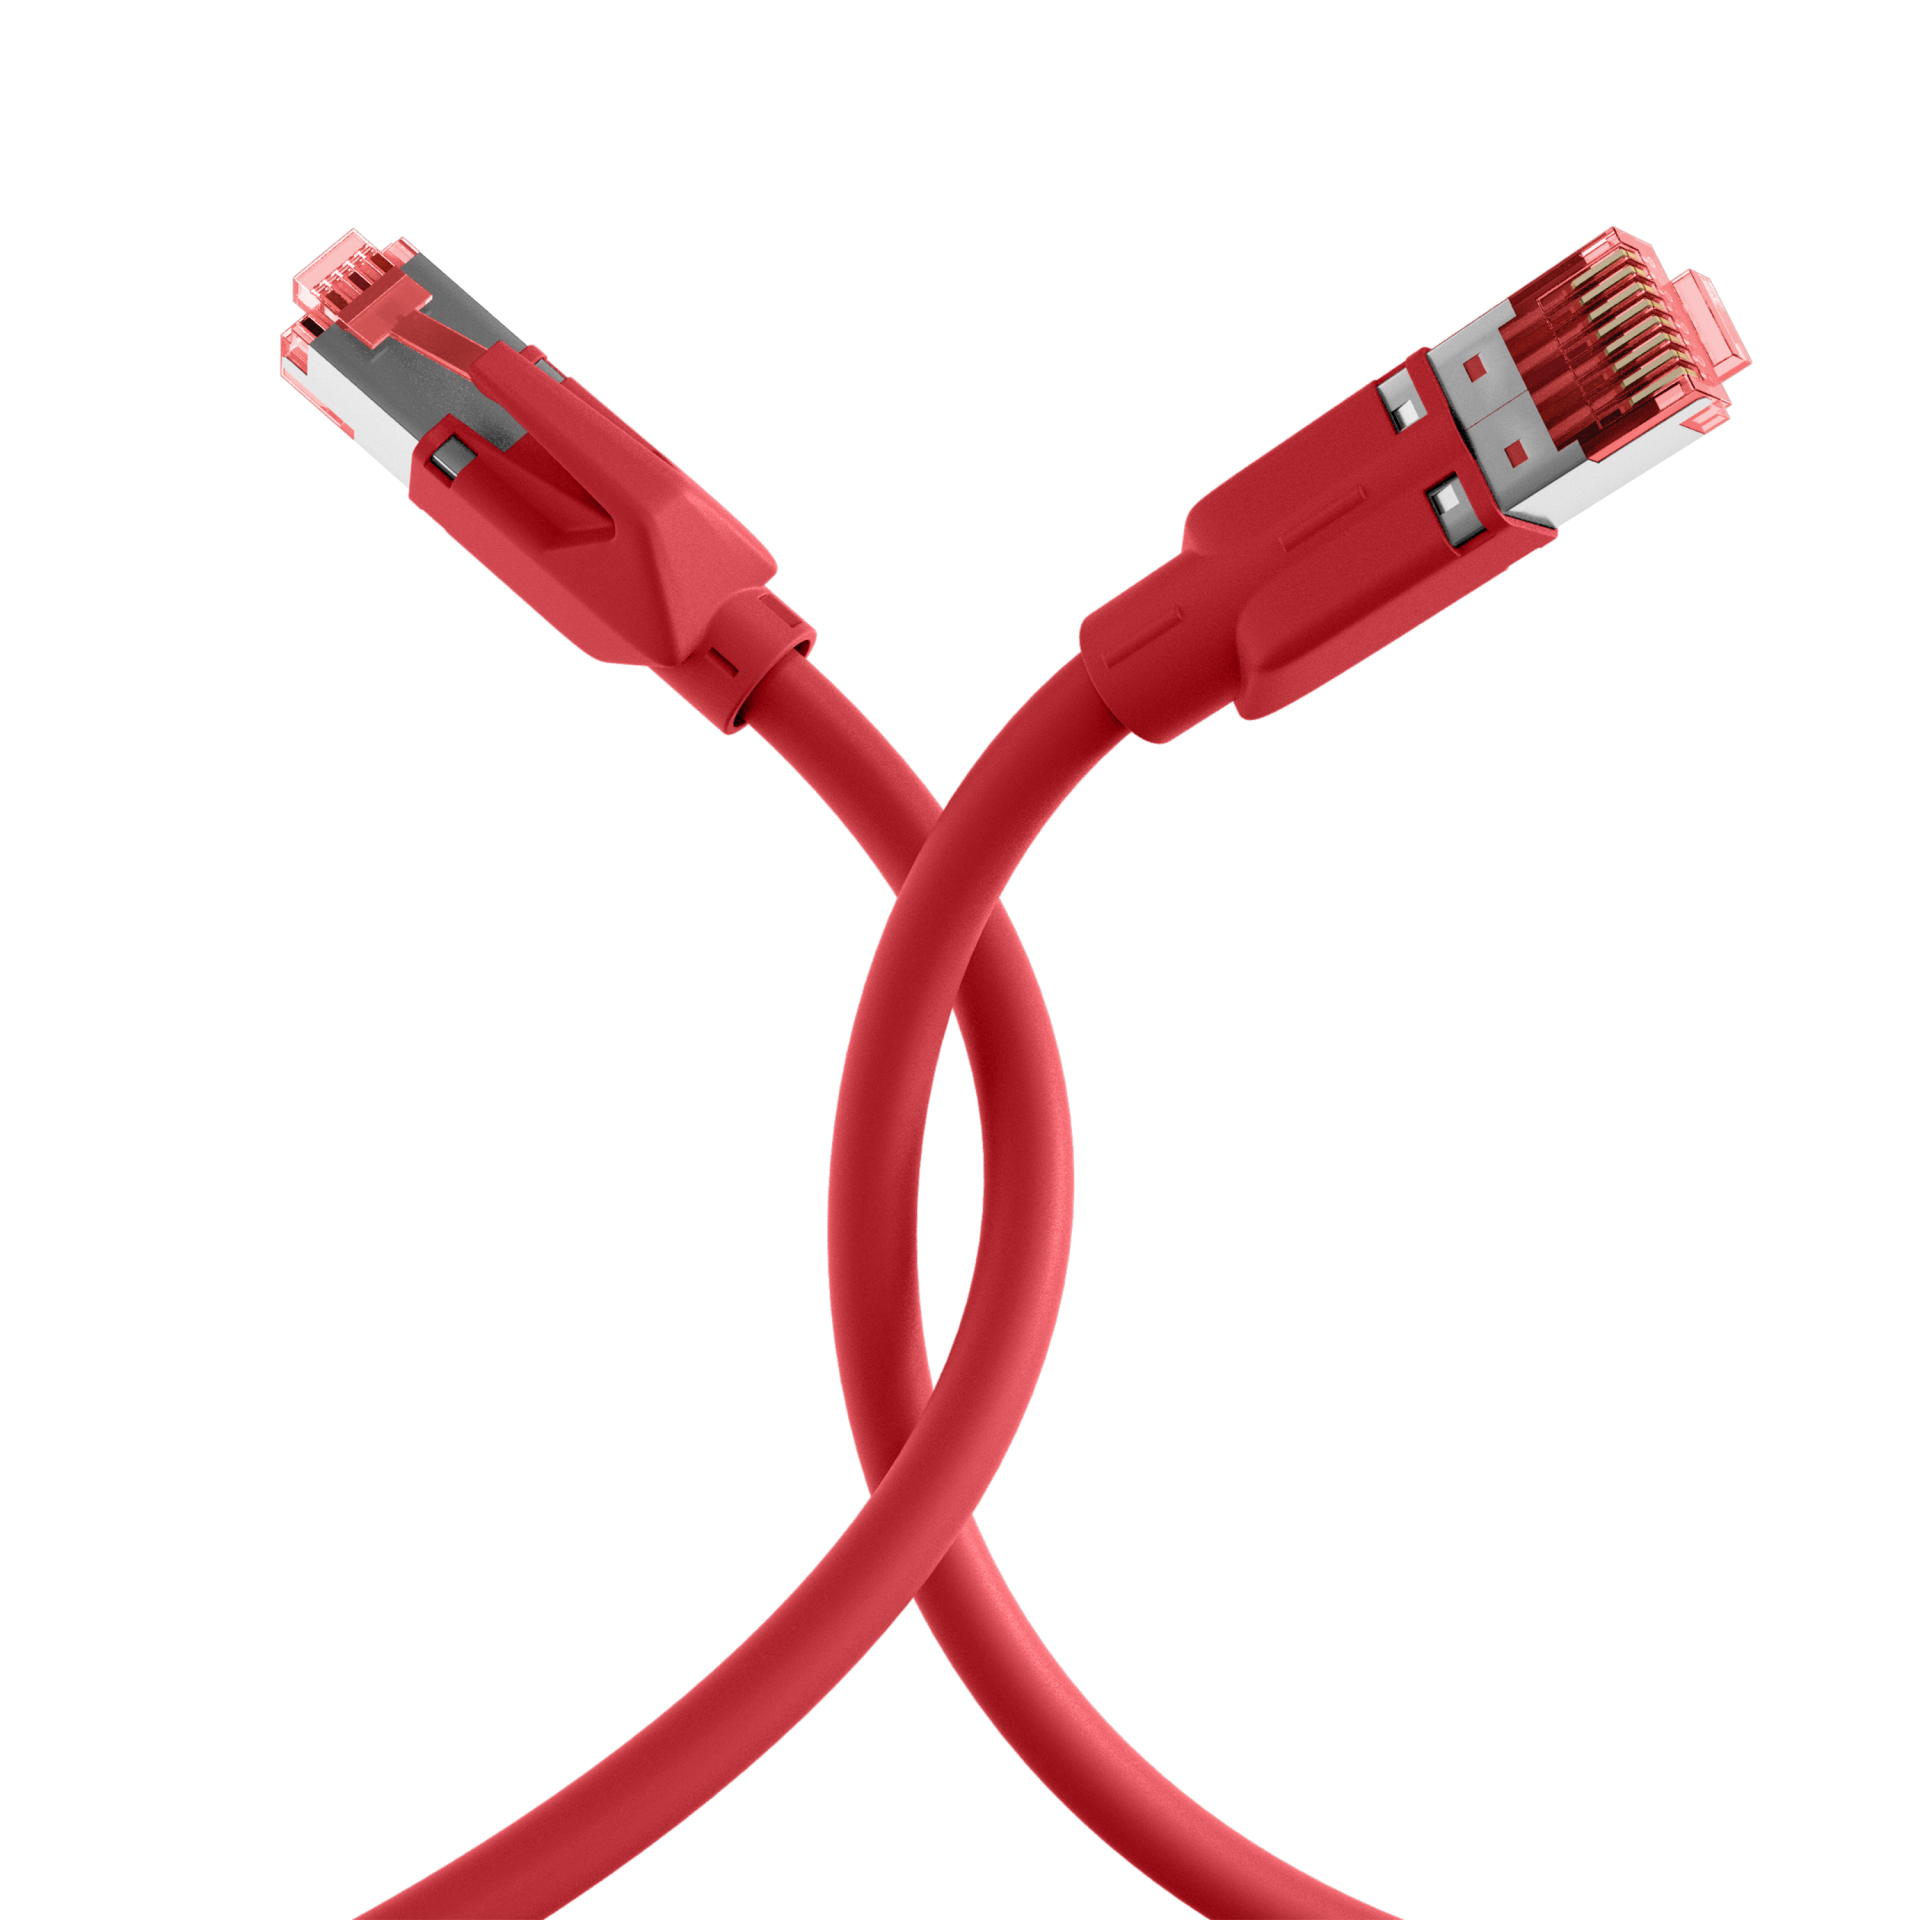 RJ45 Patch Cord Cat.6A S/FTP Dätwyler 7702 TM21 red 10m